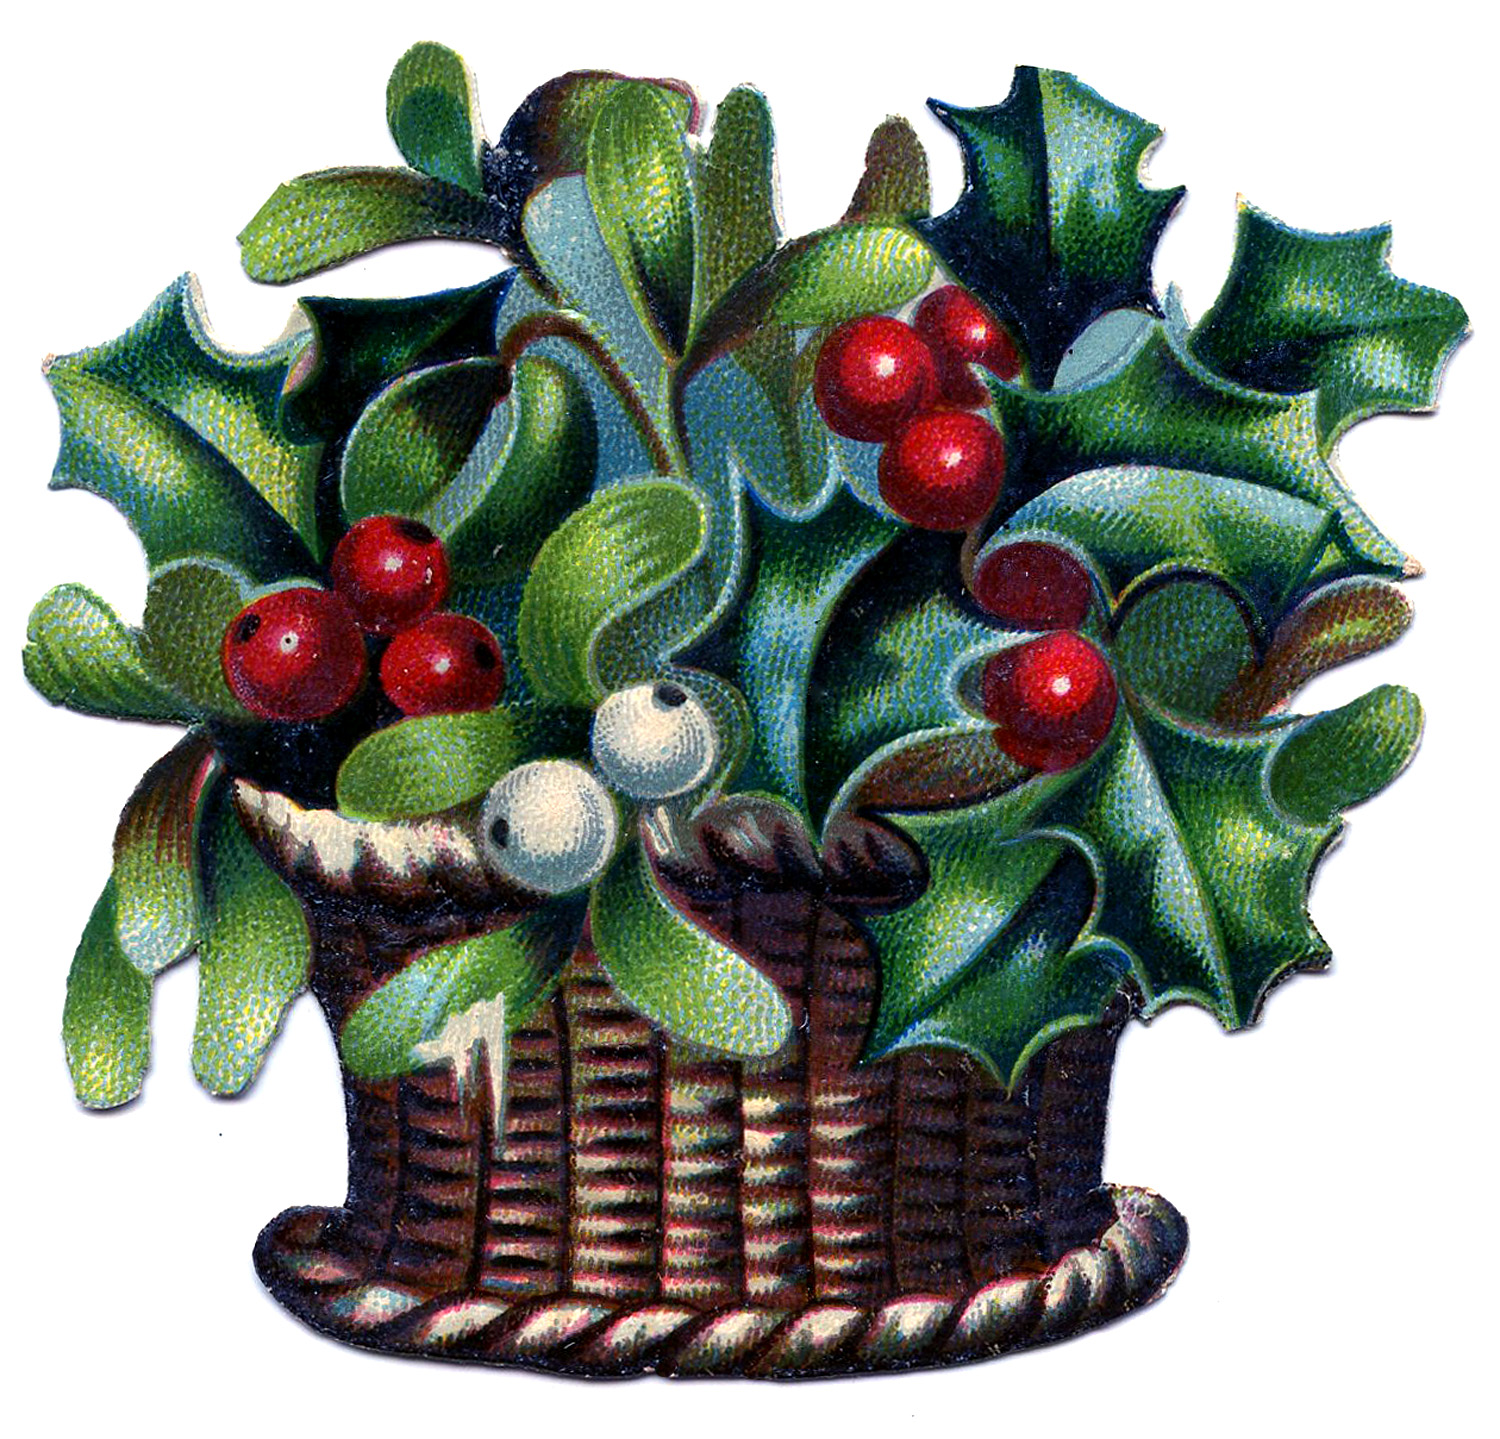 Vintage Christmas Image   Basket Of Holly And Mistletoe   The Graphics